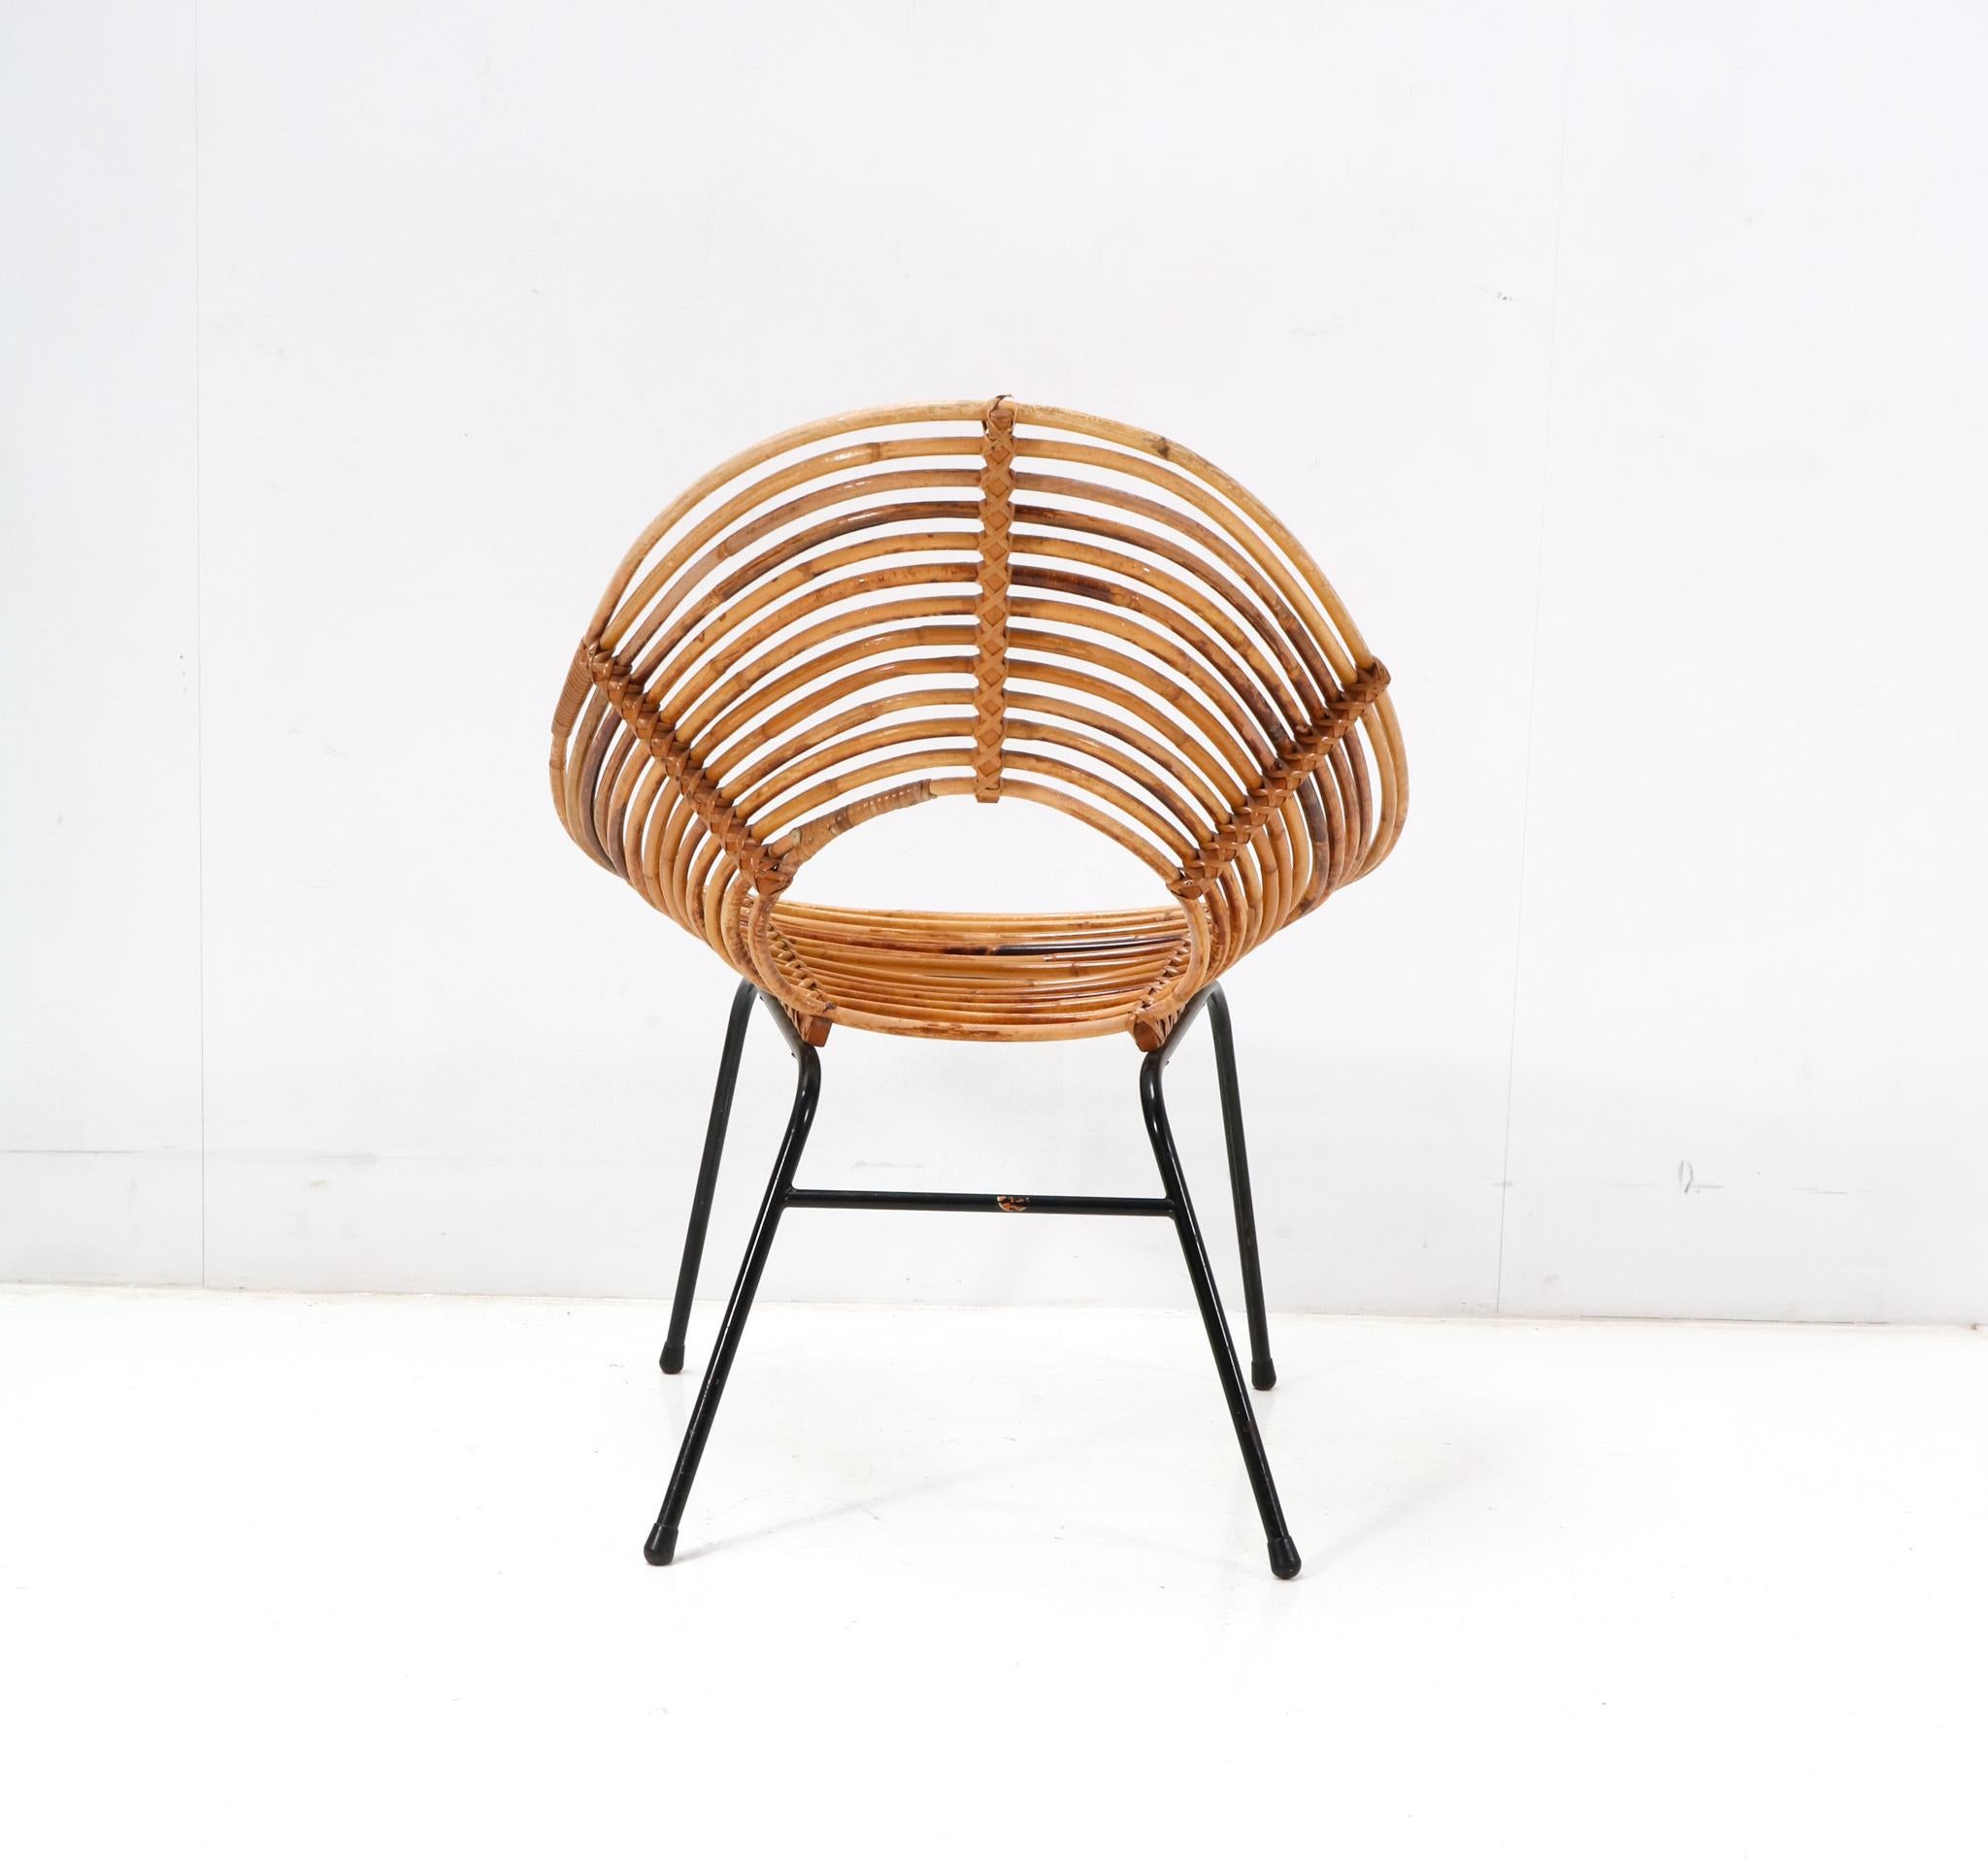 Mid-20th Century Rattan Mid-Century Modern Lounge Chair by Dirk van Sliedregt for Rohe, 1950s For Sale